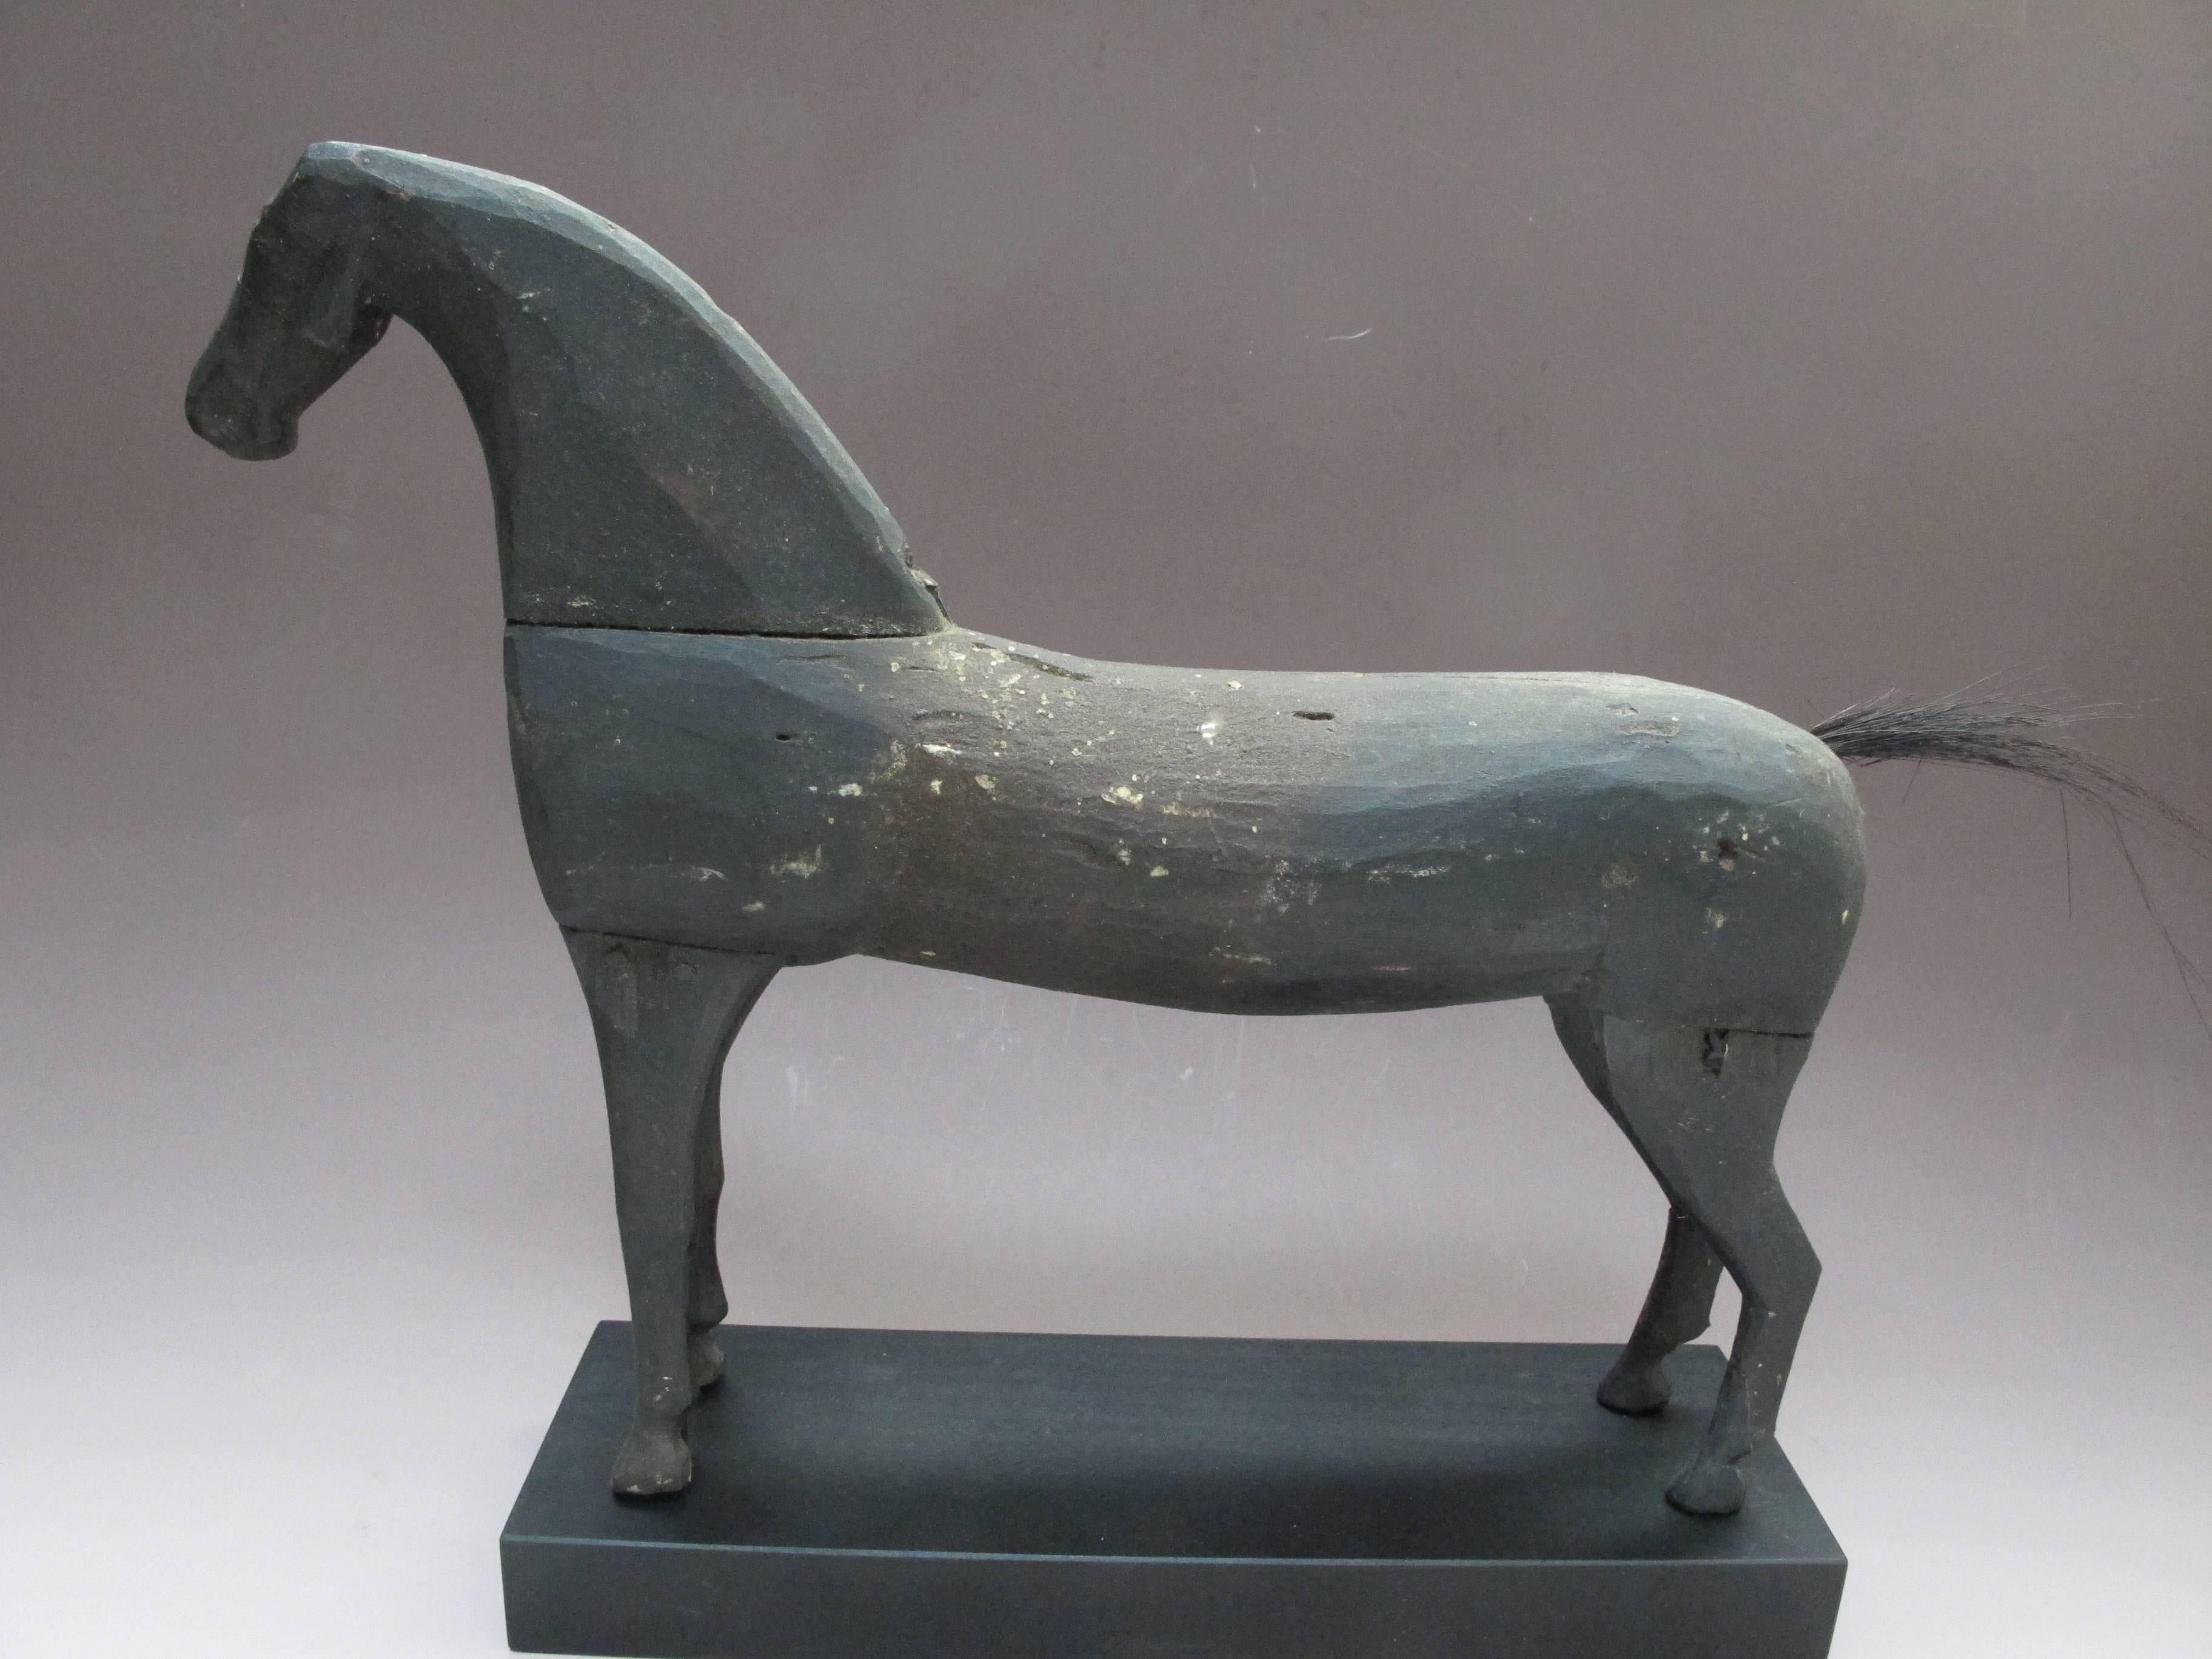 Carved and painted wood horse with joined legs and neck. Probably made for a child given its size. What distinguished it is the broad neck and elongated body.
Mounted on a black wood base.